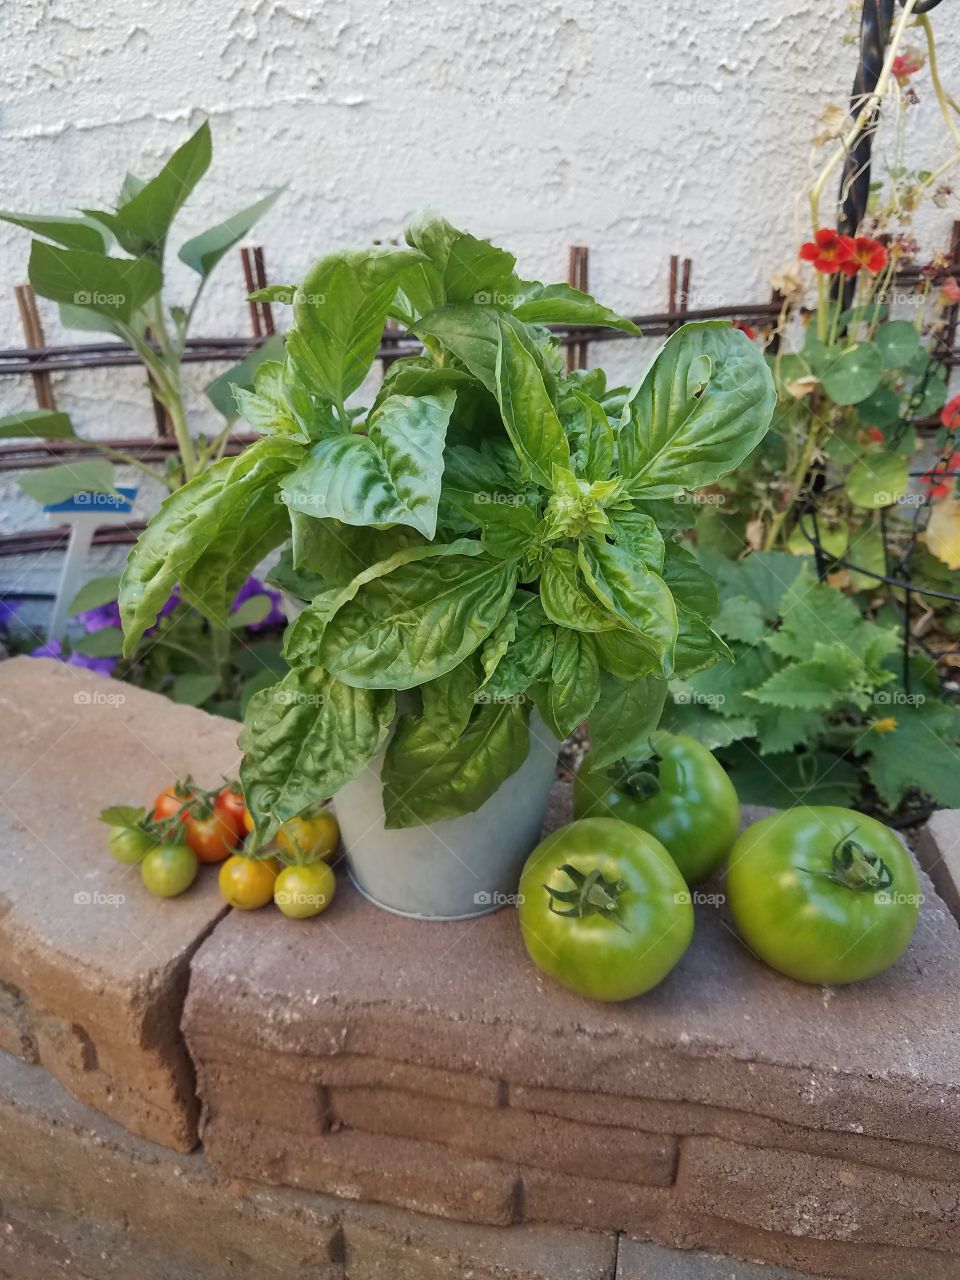 Tomato and basil harvest